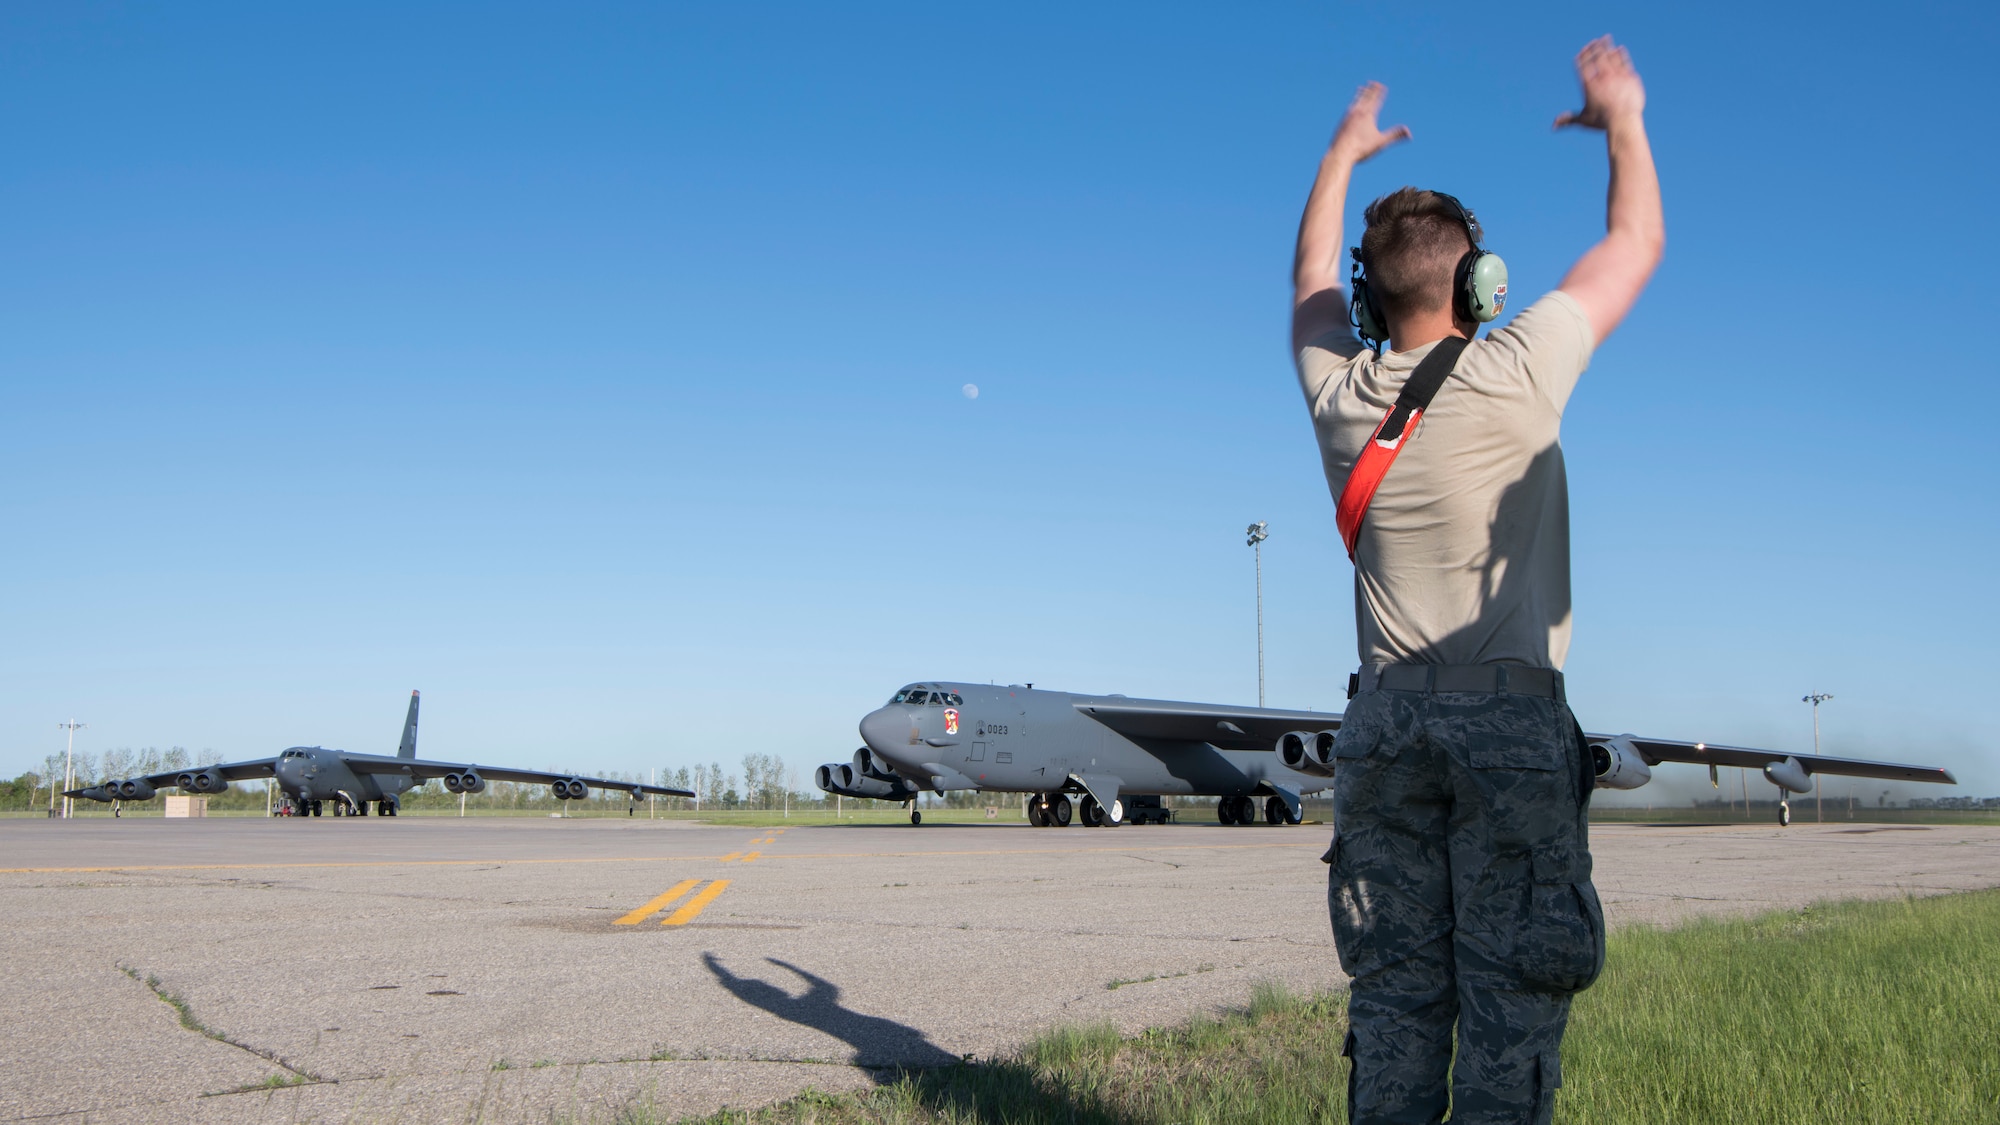 Airman 1st Class Jarrett Warrick, 5th Aircraft Maintenance Squadron crew chief, prepares a B-52H Stratofortress for takeoff at Minot Air Force Base, North Dakota, June 2, 2020. During flight, the B-52s will perform joint and combined training, exercises, and operations to help mitigate and reduce security risks associated with increased human activity in the Arctic. (U.S. Air Force photo by Senior Airman Alyssa Day)